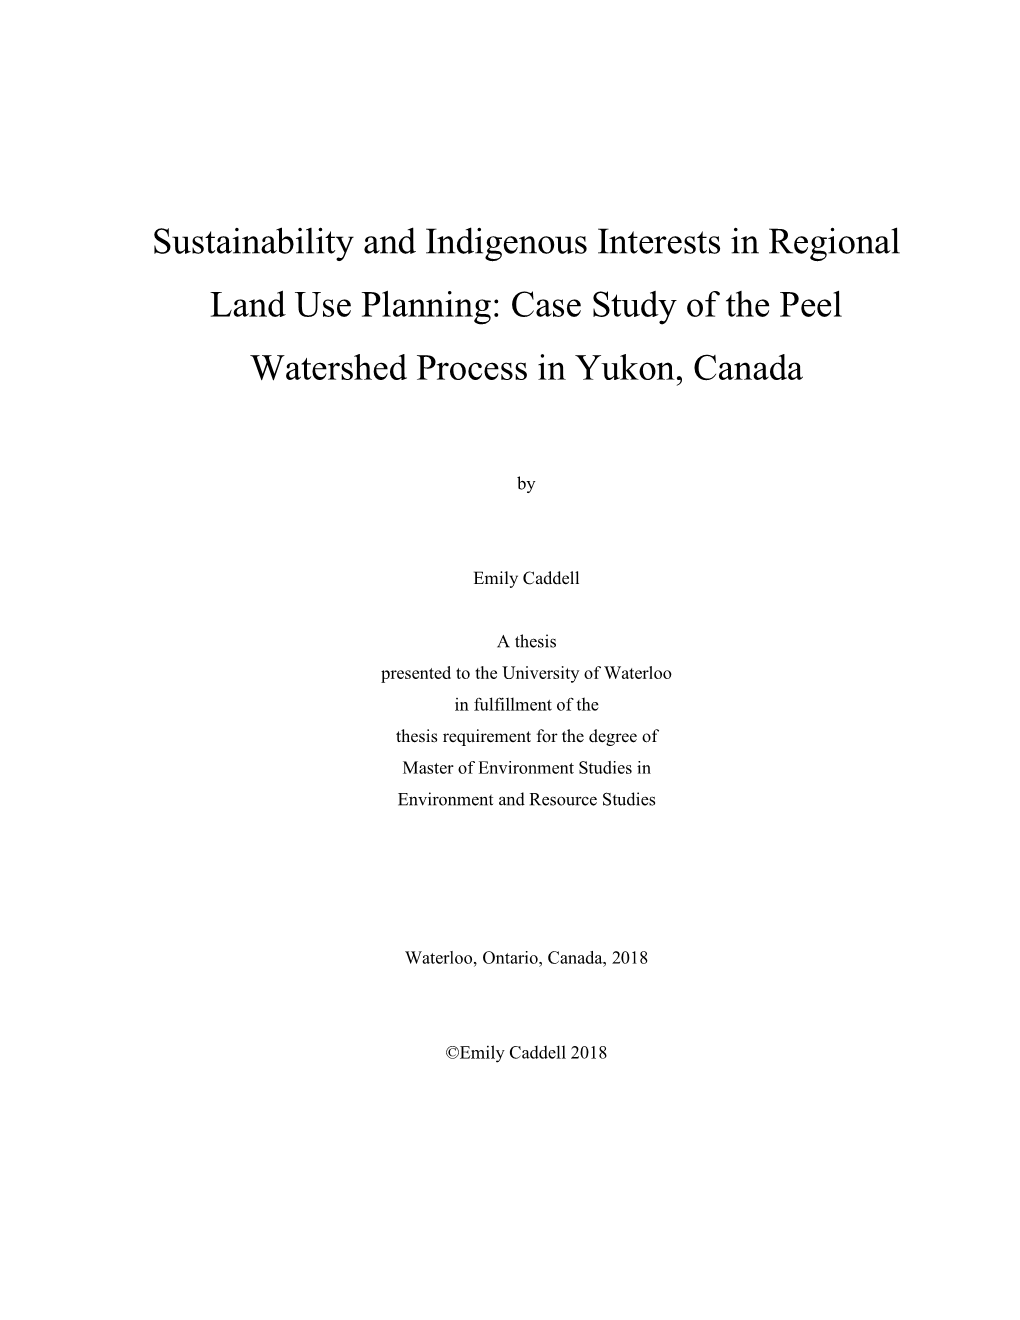 Sustainability and Indigenous Interests in Regional Land Use Planning: Case Study of the Peel Watershed Process in Yukon, Canada